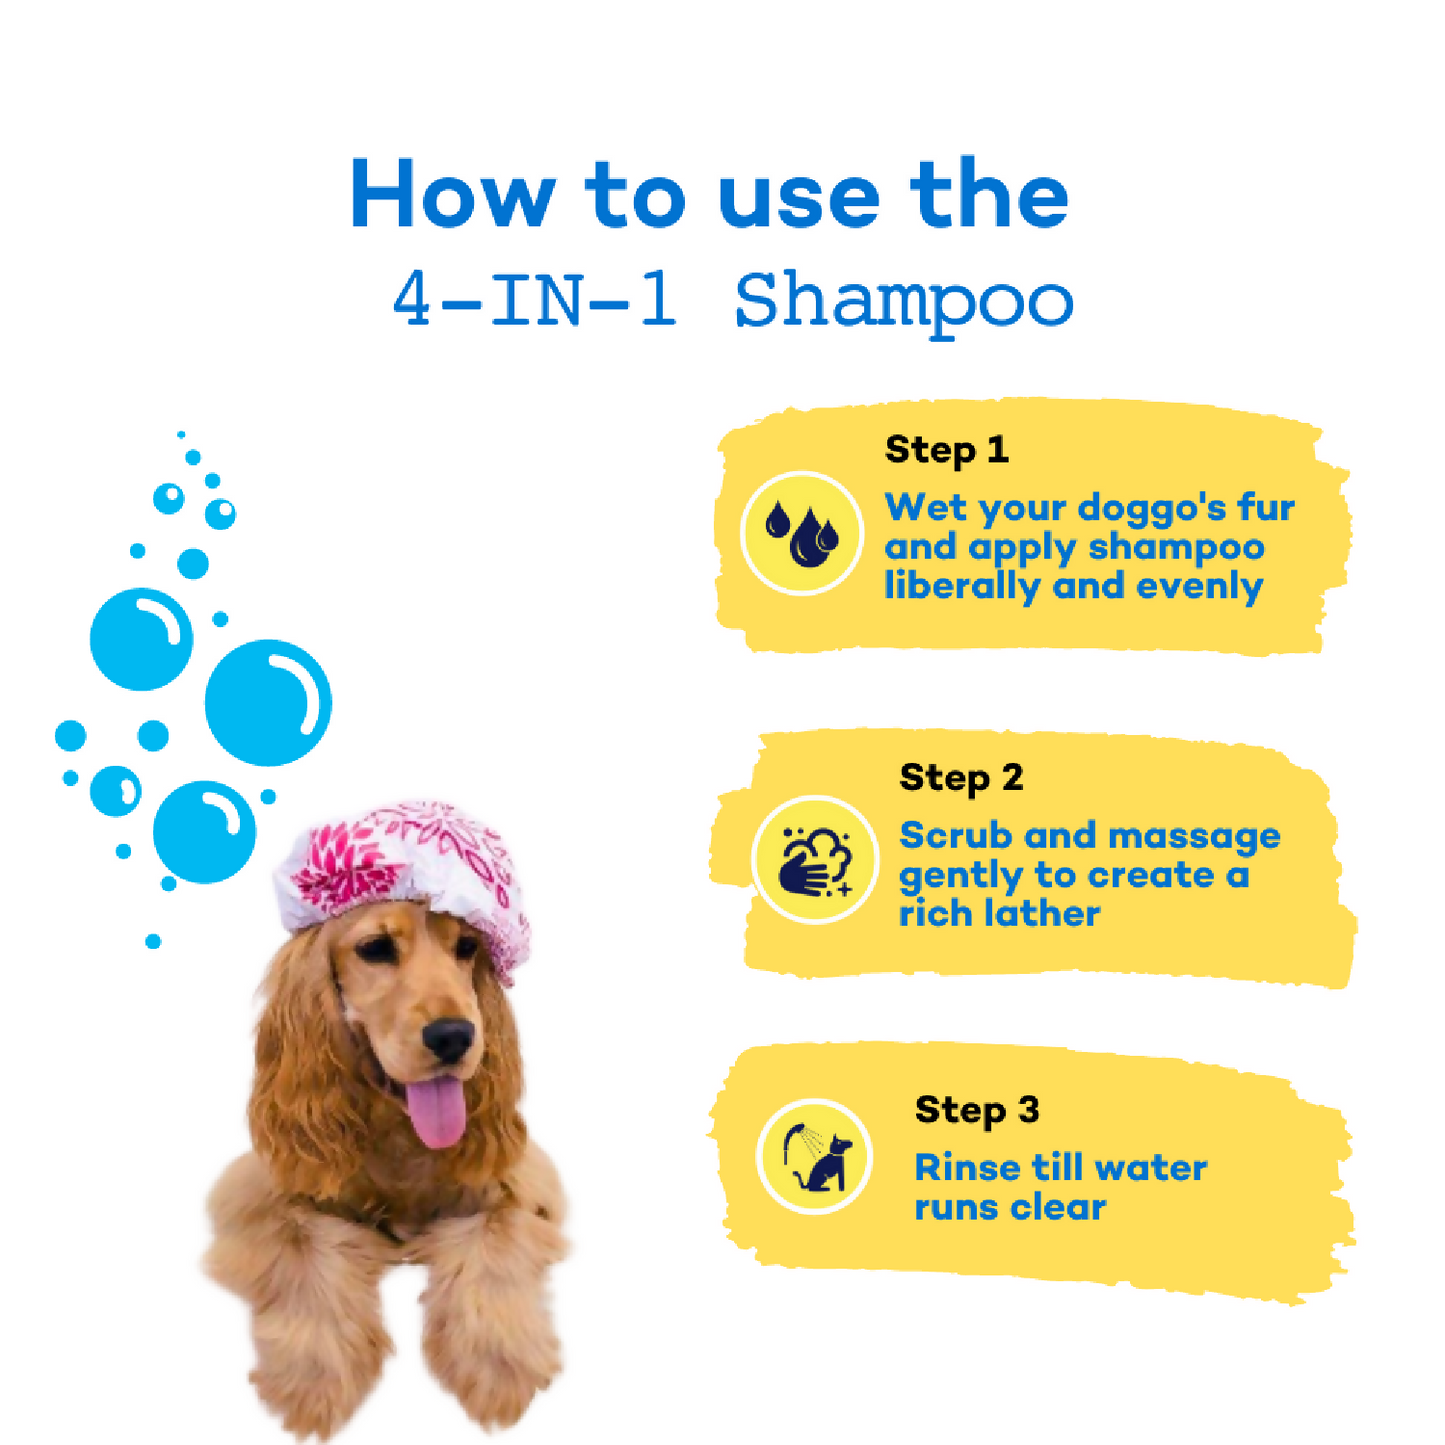 The Good Paws Awesome Pawsome 4 in 1 Dog Shampoo | Moisturizing & Conditioning | Cleanse & Deodorize